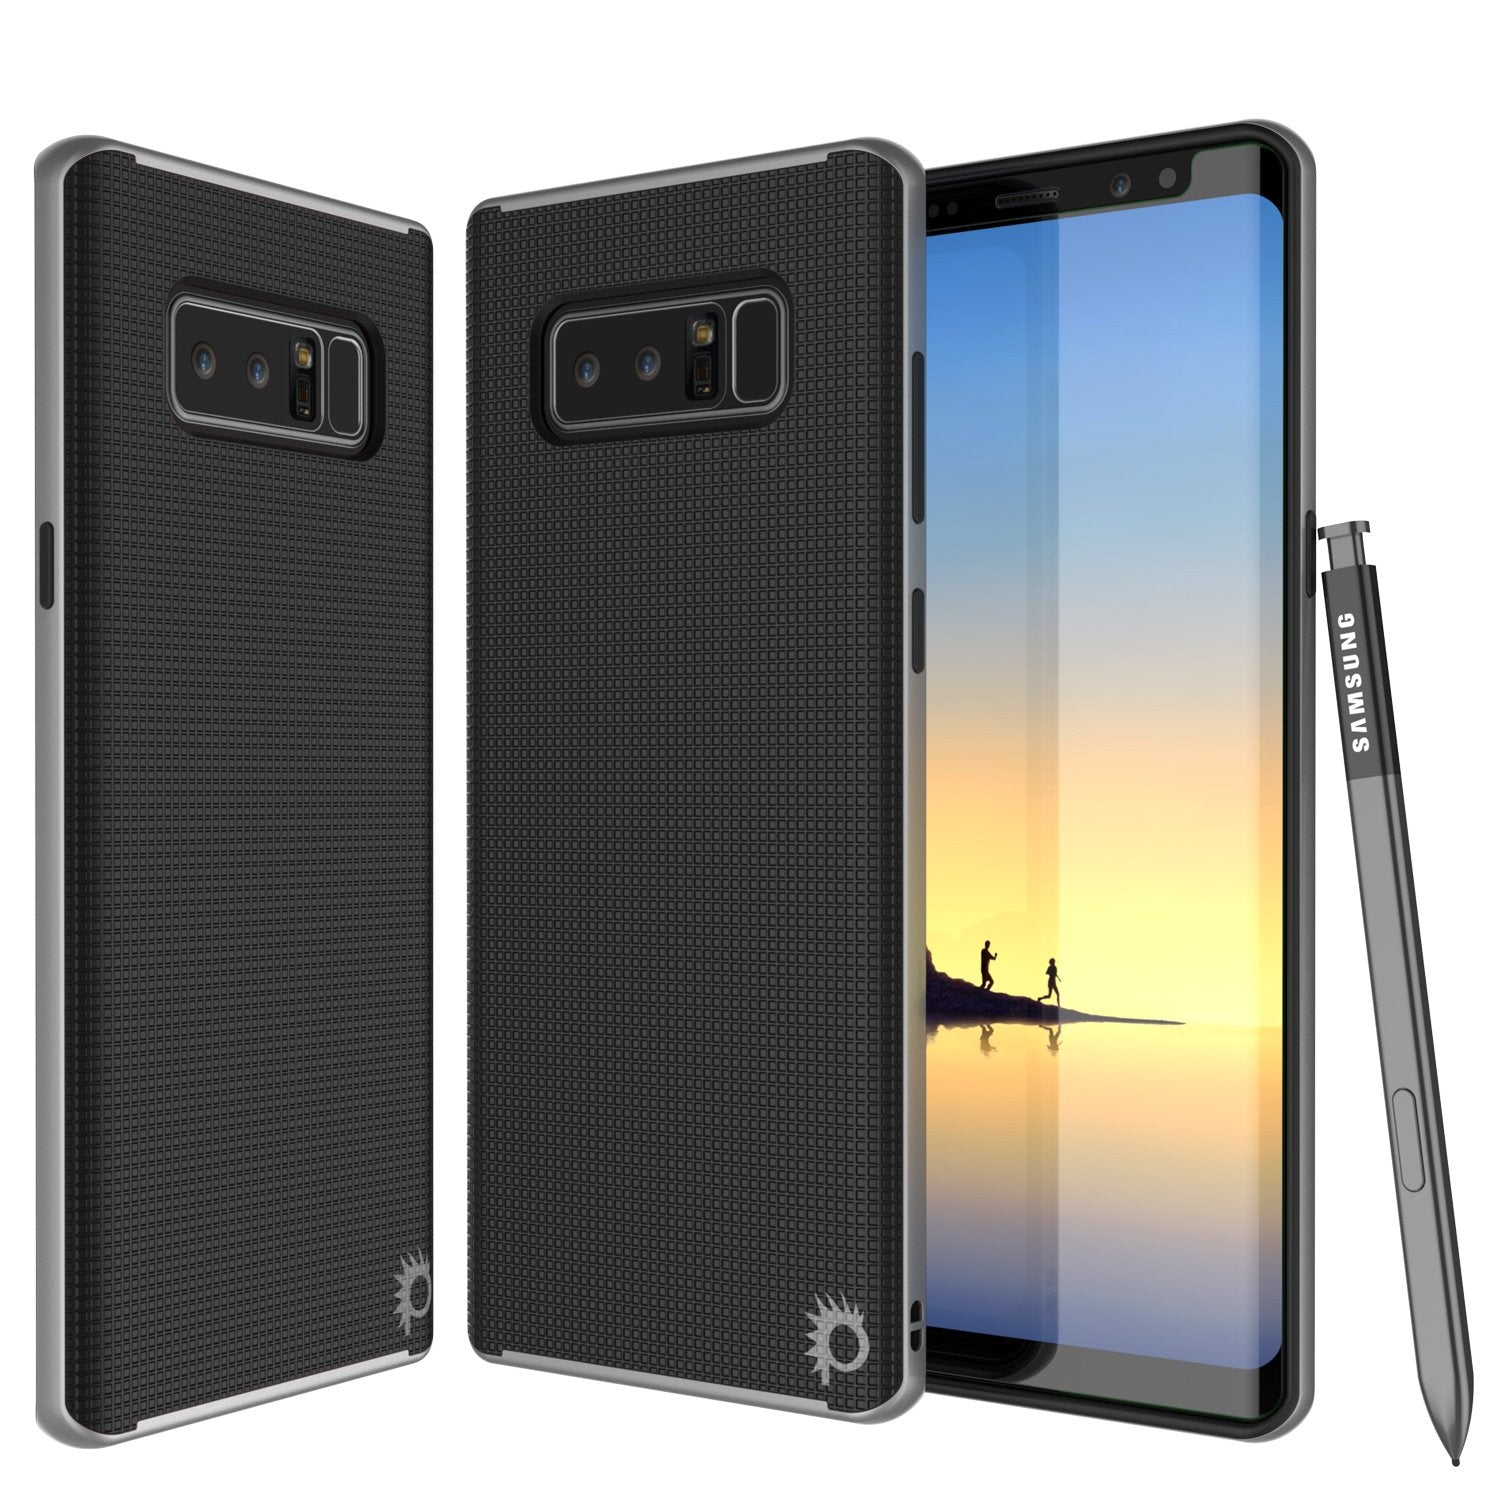 Galaxy Note 8 Case, PunkCase [Stealth Series] Hybrid 3-Piece Shockproof Dual Layer Cover [Non-Slip] [Soft TPU + PC Bumper] with PUNKSHIELD Screen Protector for Samsung Note 8 [Silver] (Color in image: Silver)